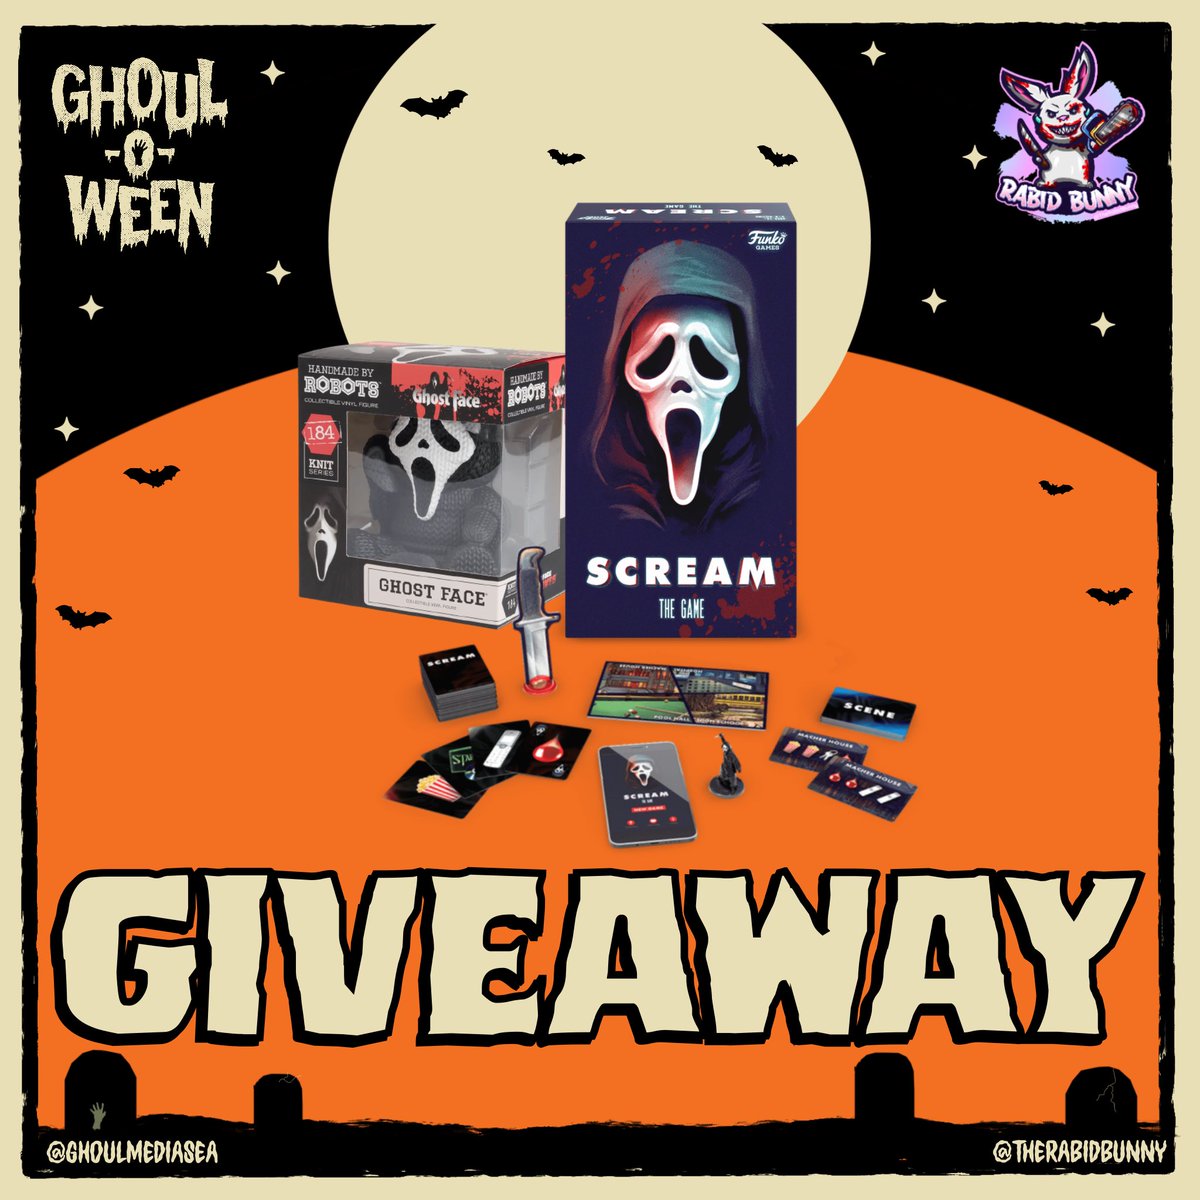 Running an awesome Ghost Face giveaway over on Instagram with @TheRabidBunny0X for Ghoul-o-ween 🎃 - Go check it out! 
#Scream #GhostFace #Funko #HandmadebyRobots